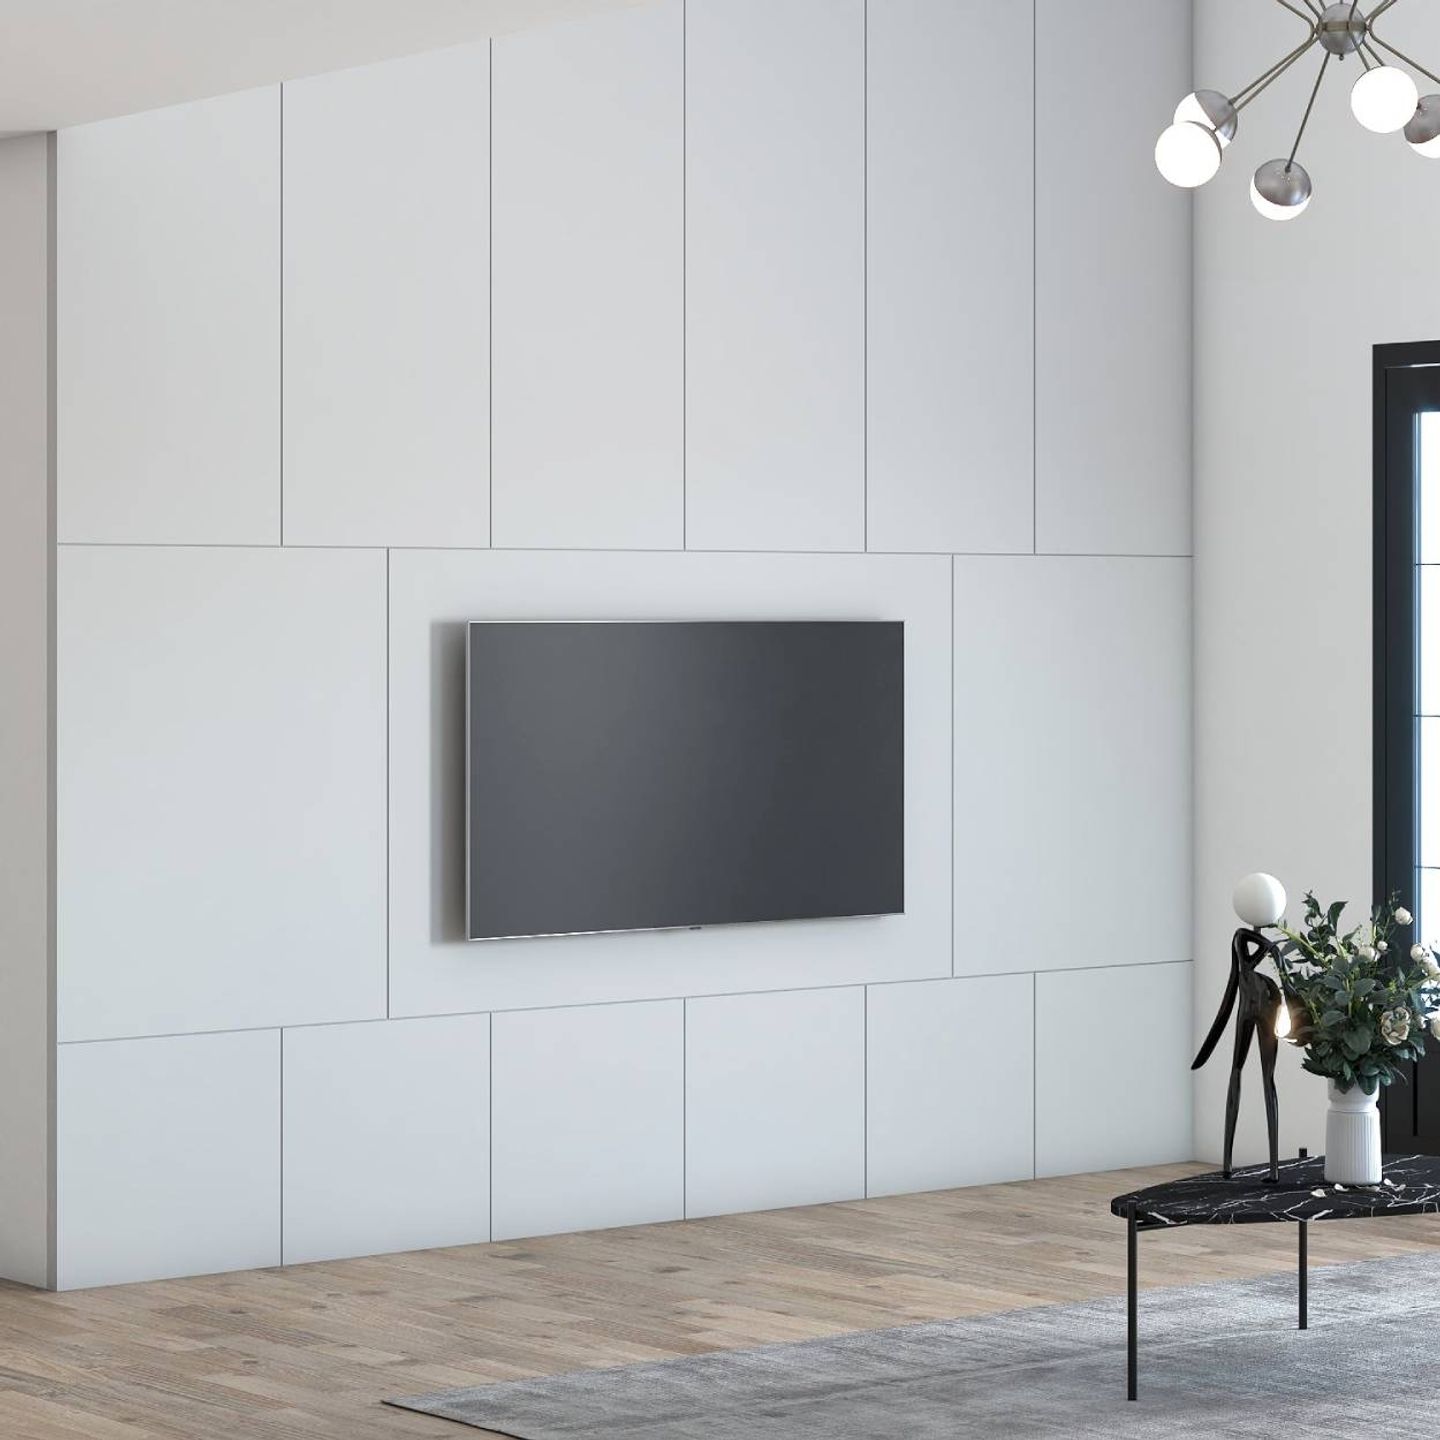 TV Unit Design With White Backpanel And Grooves - Livspace